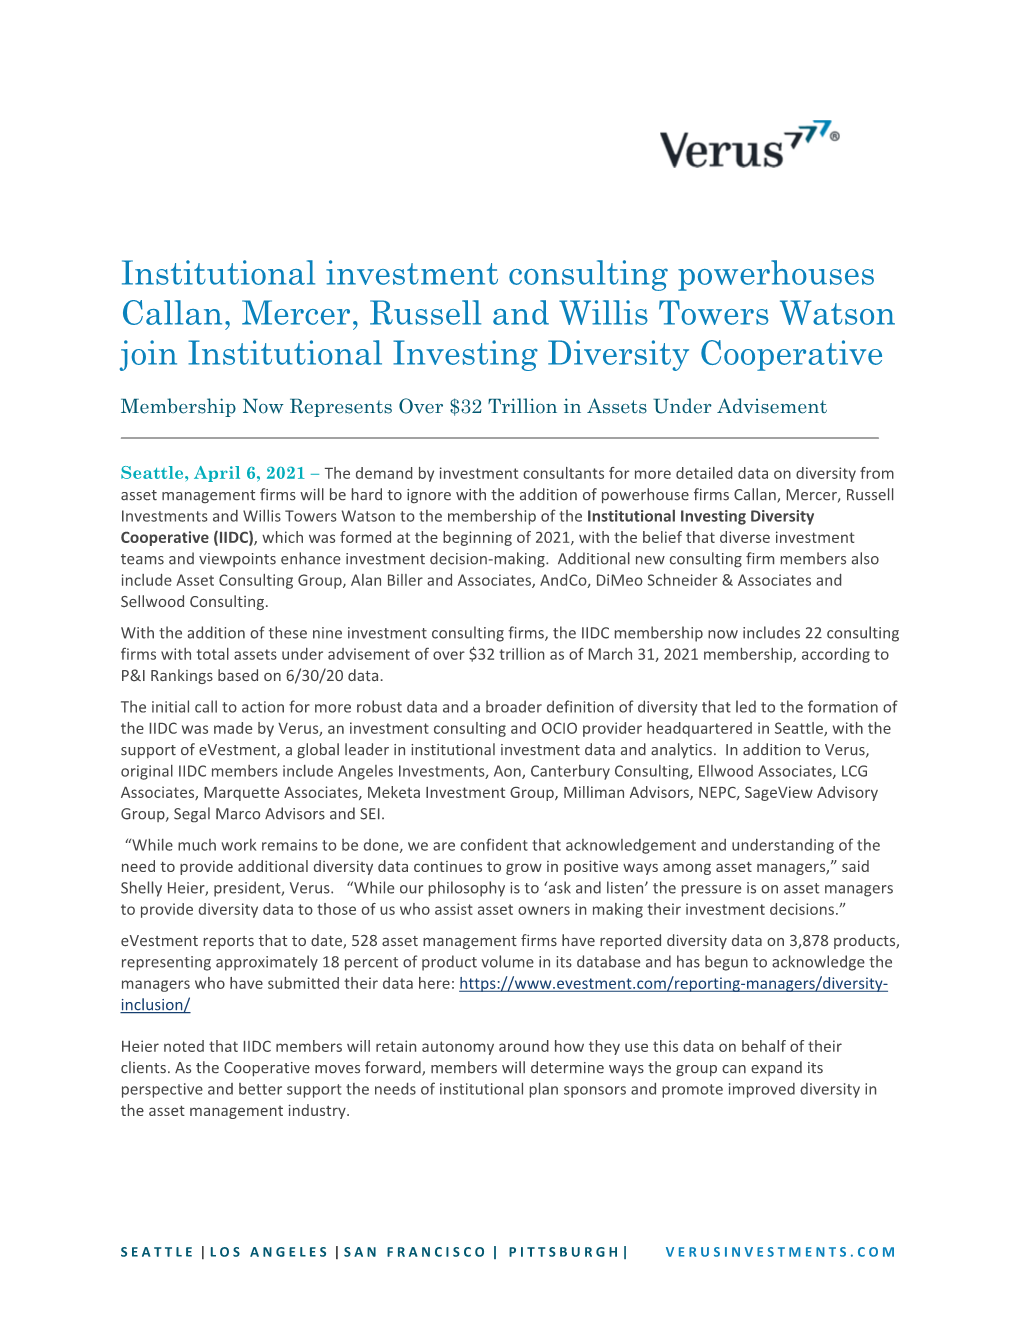 Institutional Investment Consulting Powerhouses Callan, Mercer, Russell and Willis Towers Watson Join Institutional Investing Diversity Cooperative